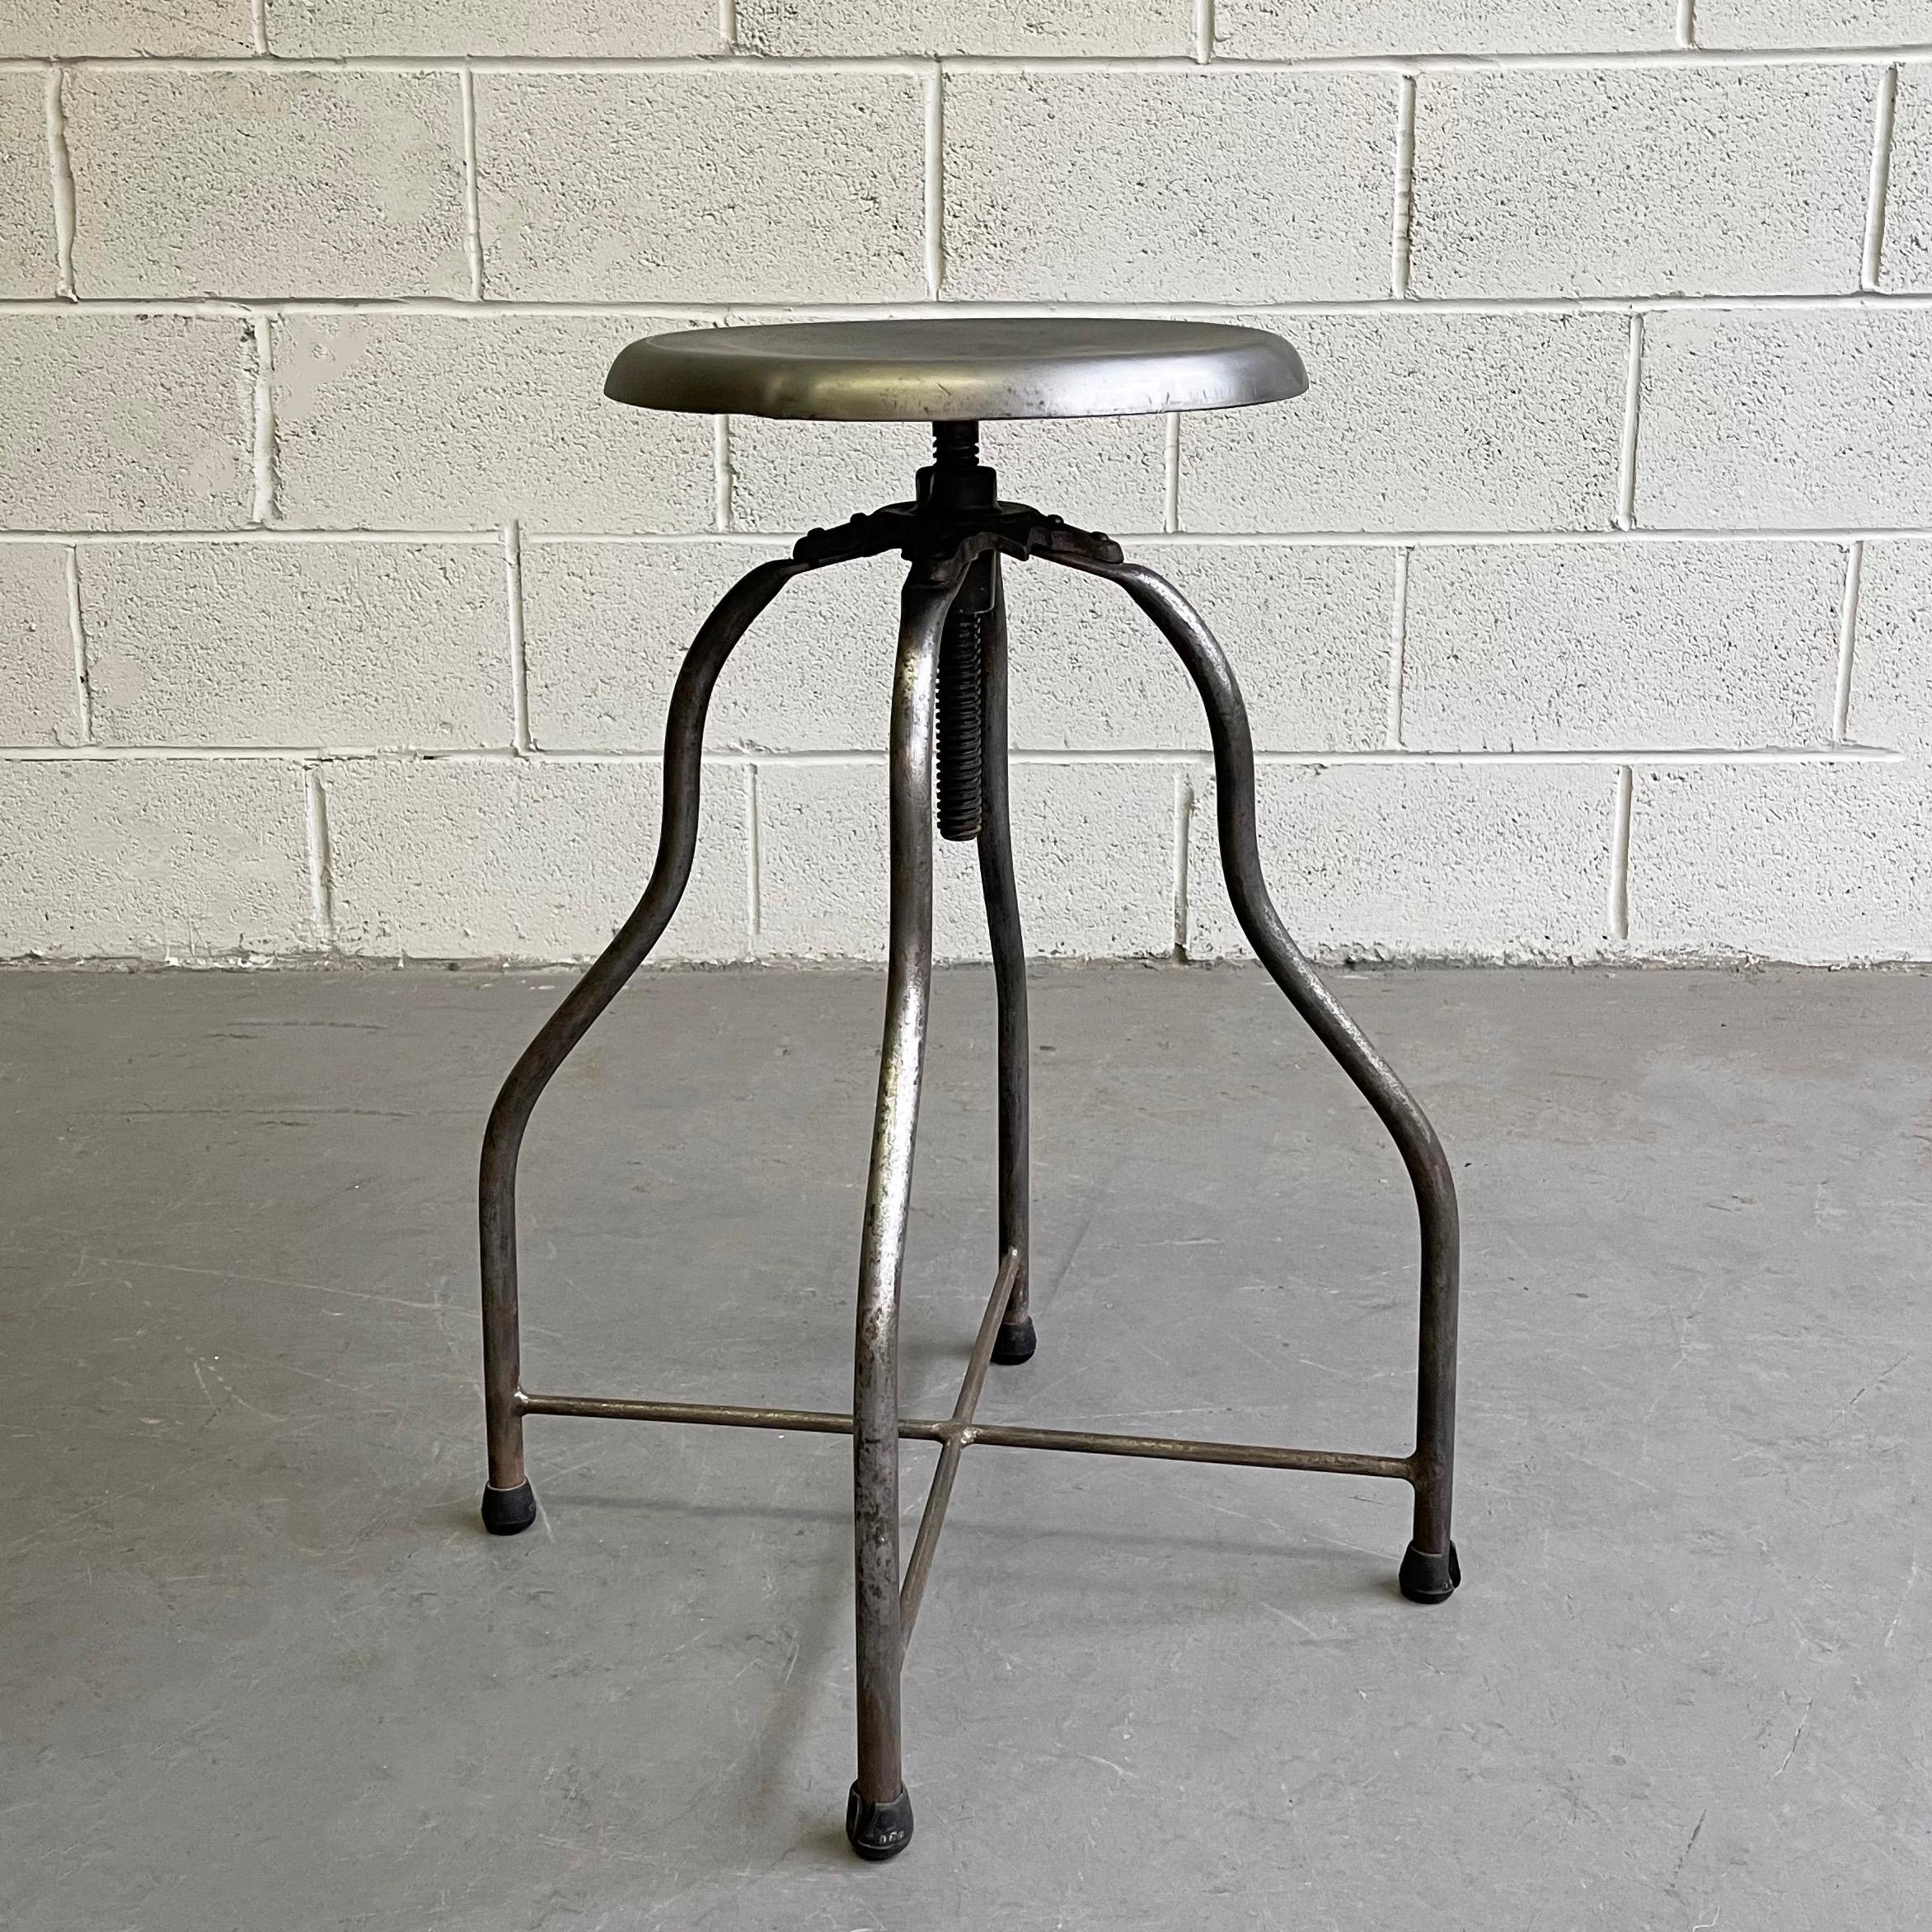 Early 20th century, brushed steel, apothecary, hospital, examination swivel stool is height adjustable from 24 - 30 inches.